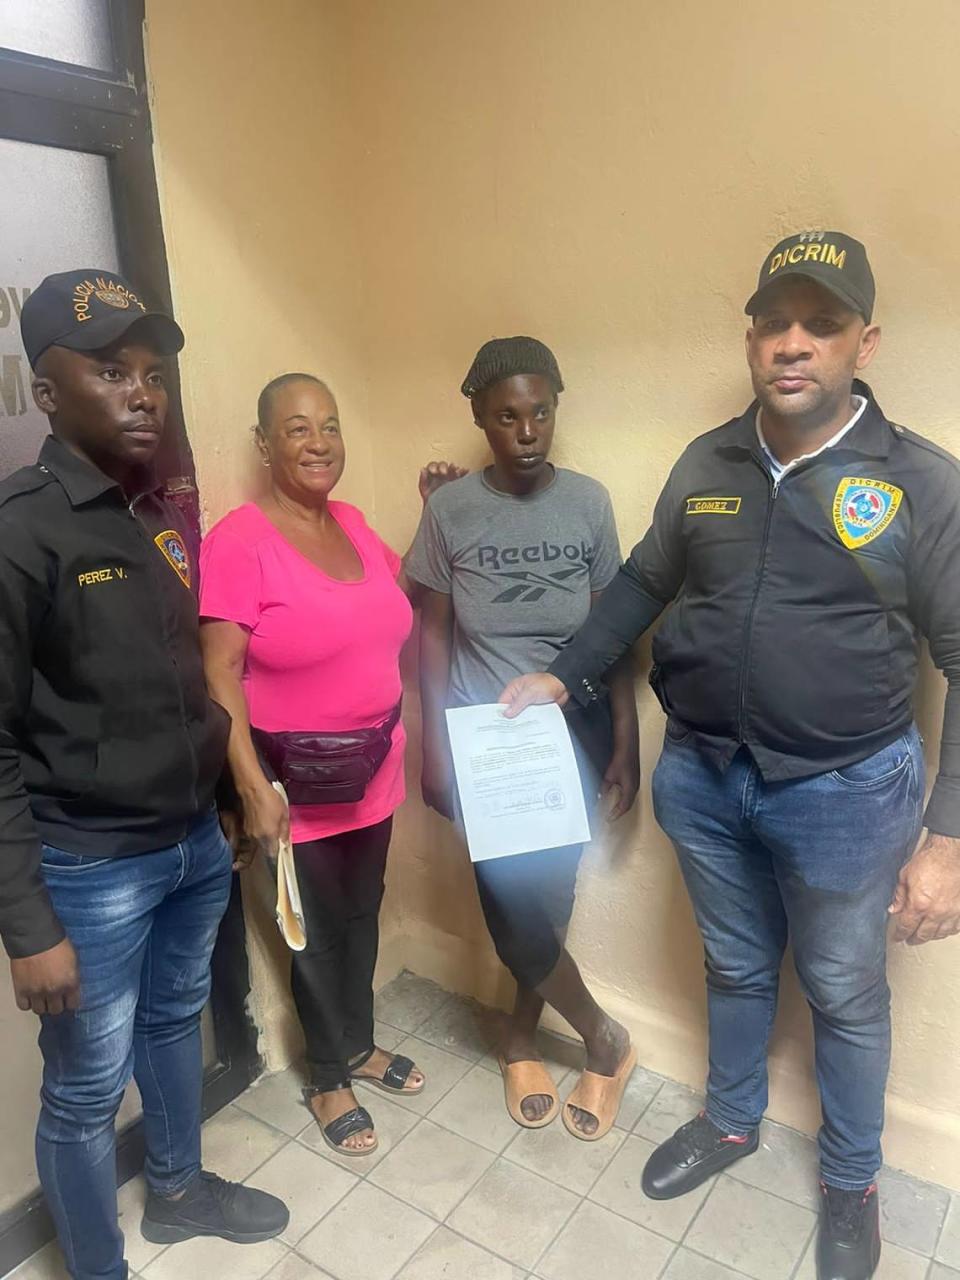 Dominican national Cristina Martínez, in a gray shirt, is reunited with her family two weeks after she disappeared after being arrested by police and taken into immigration custody by Dominican officials who believe she was a Haitian national. Her family says she was subsequently deported to Haiti.